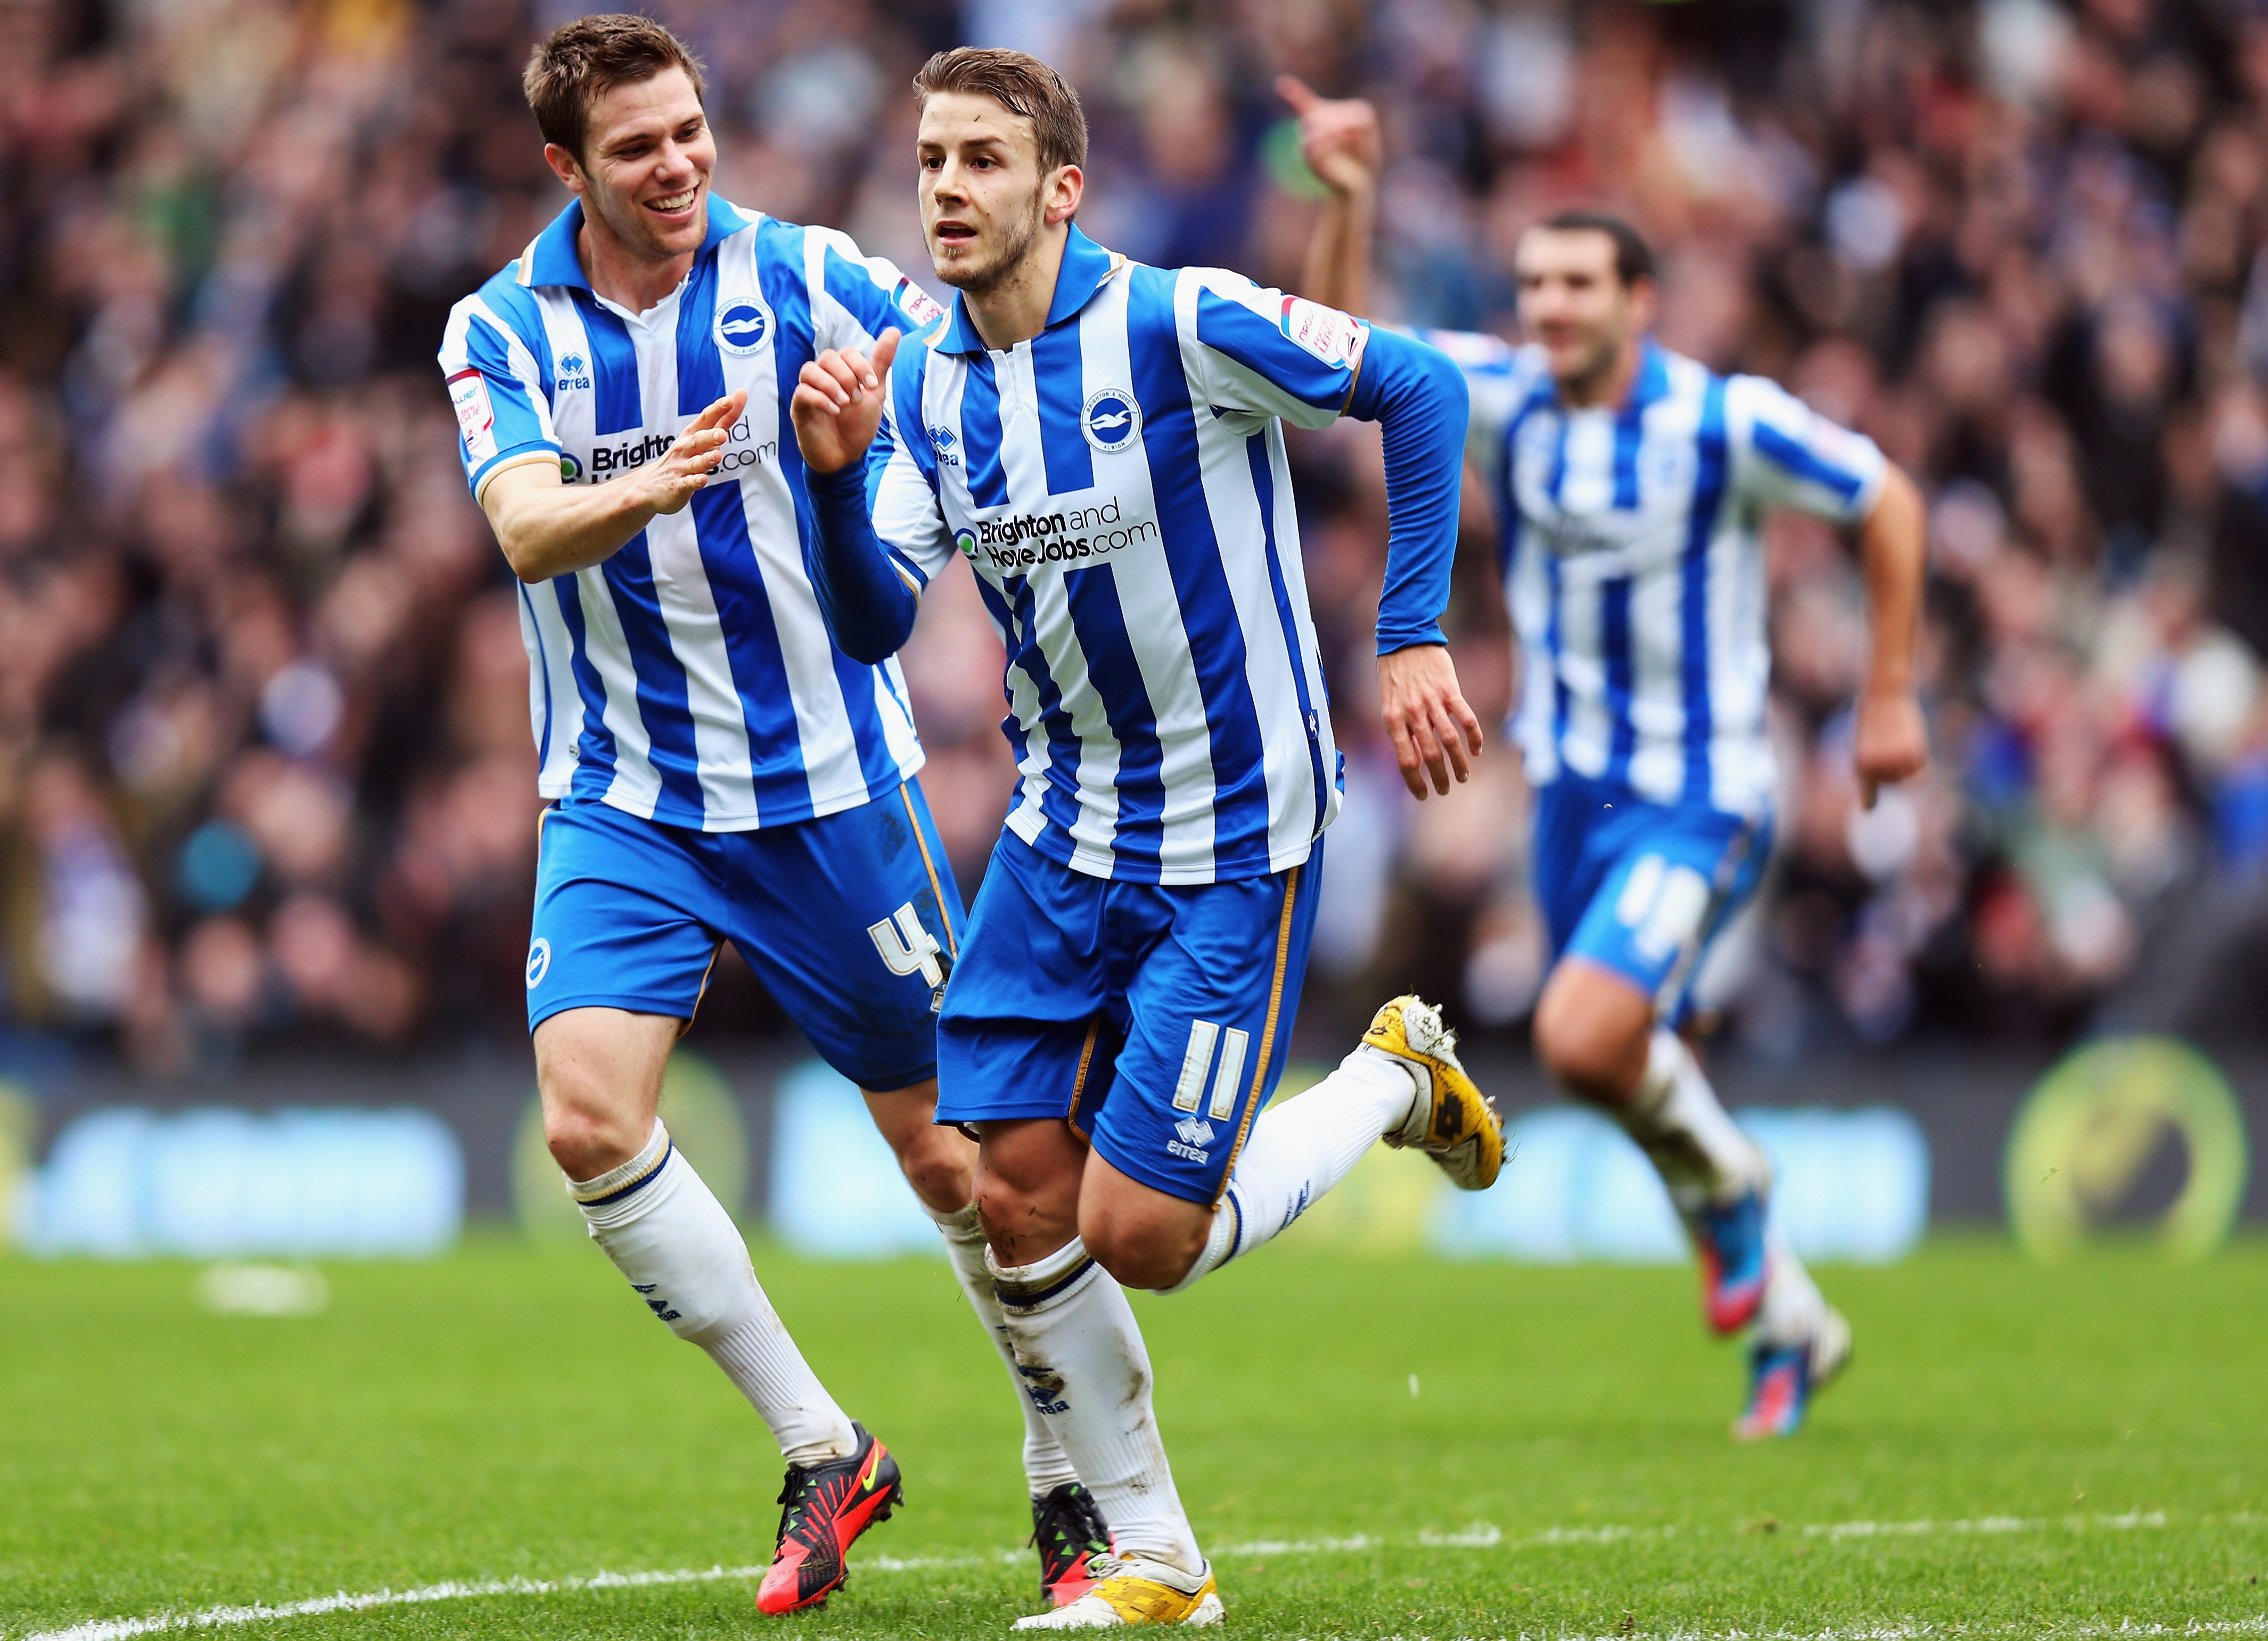 Brighton VS Manchester City ( BETTING TIPS, Match Preview & Expert Analysis )